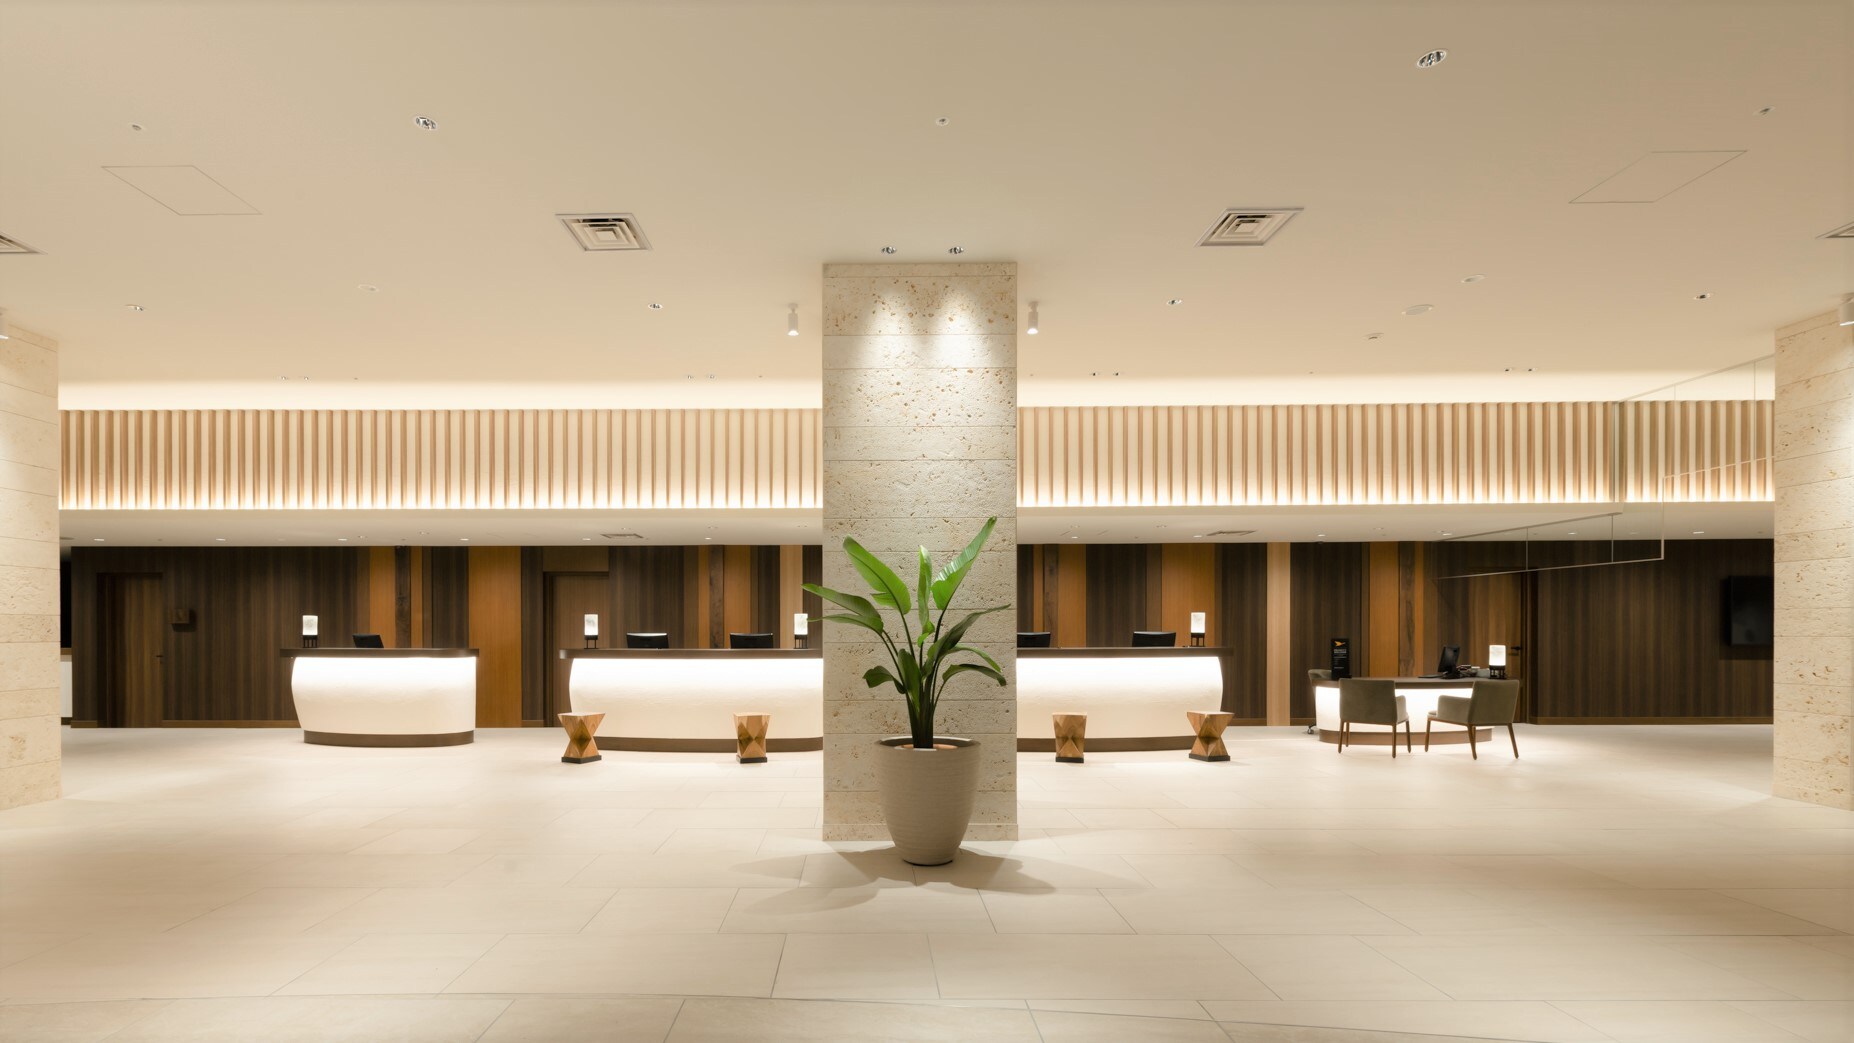 [Front] We will entertain our customers in the sophisticated space of Novotel.